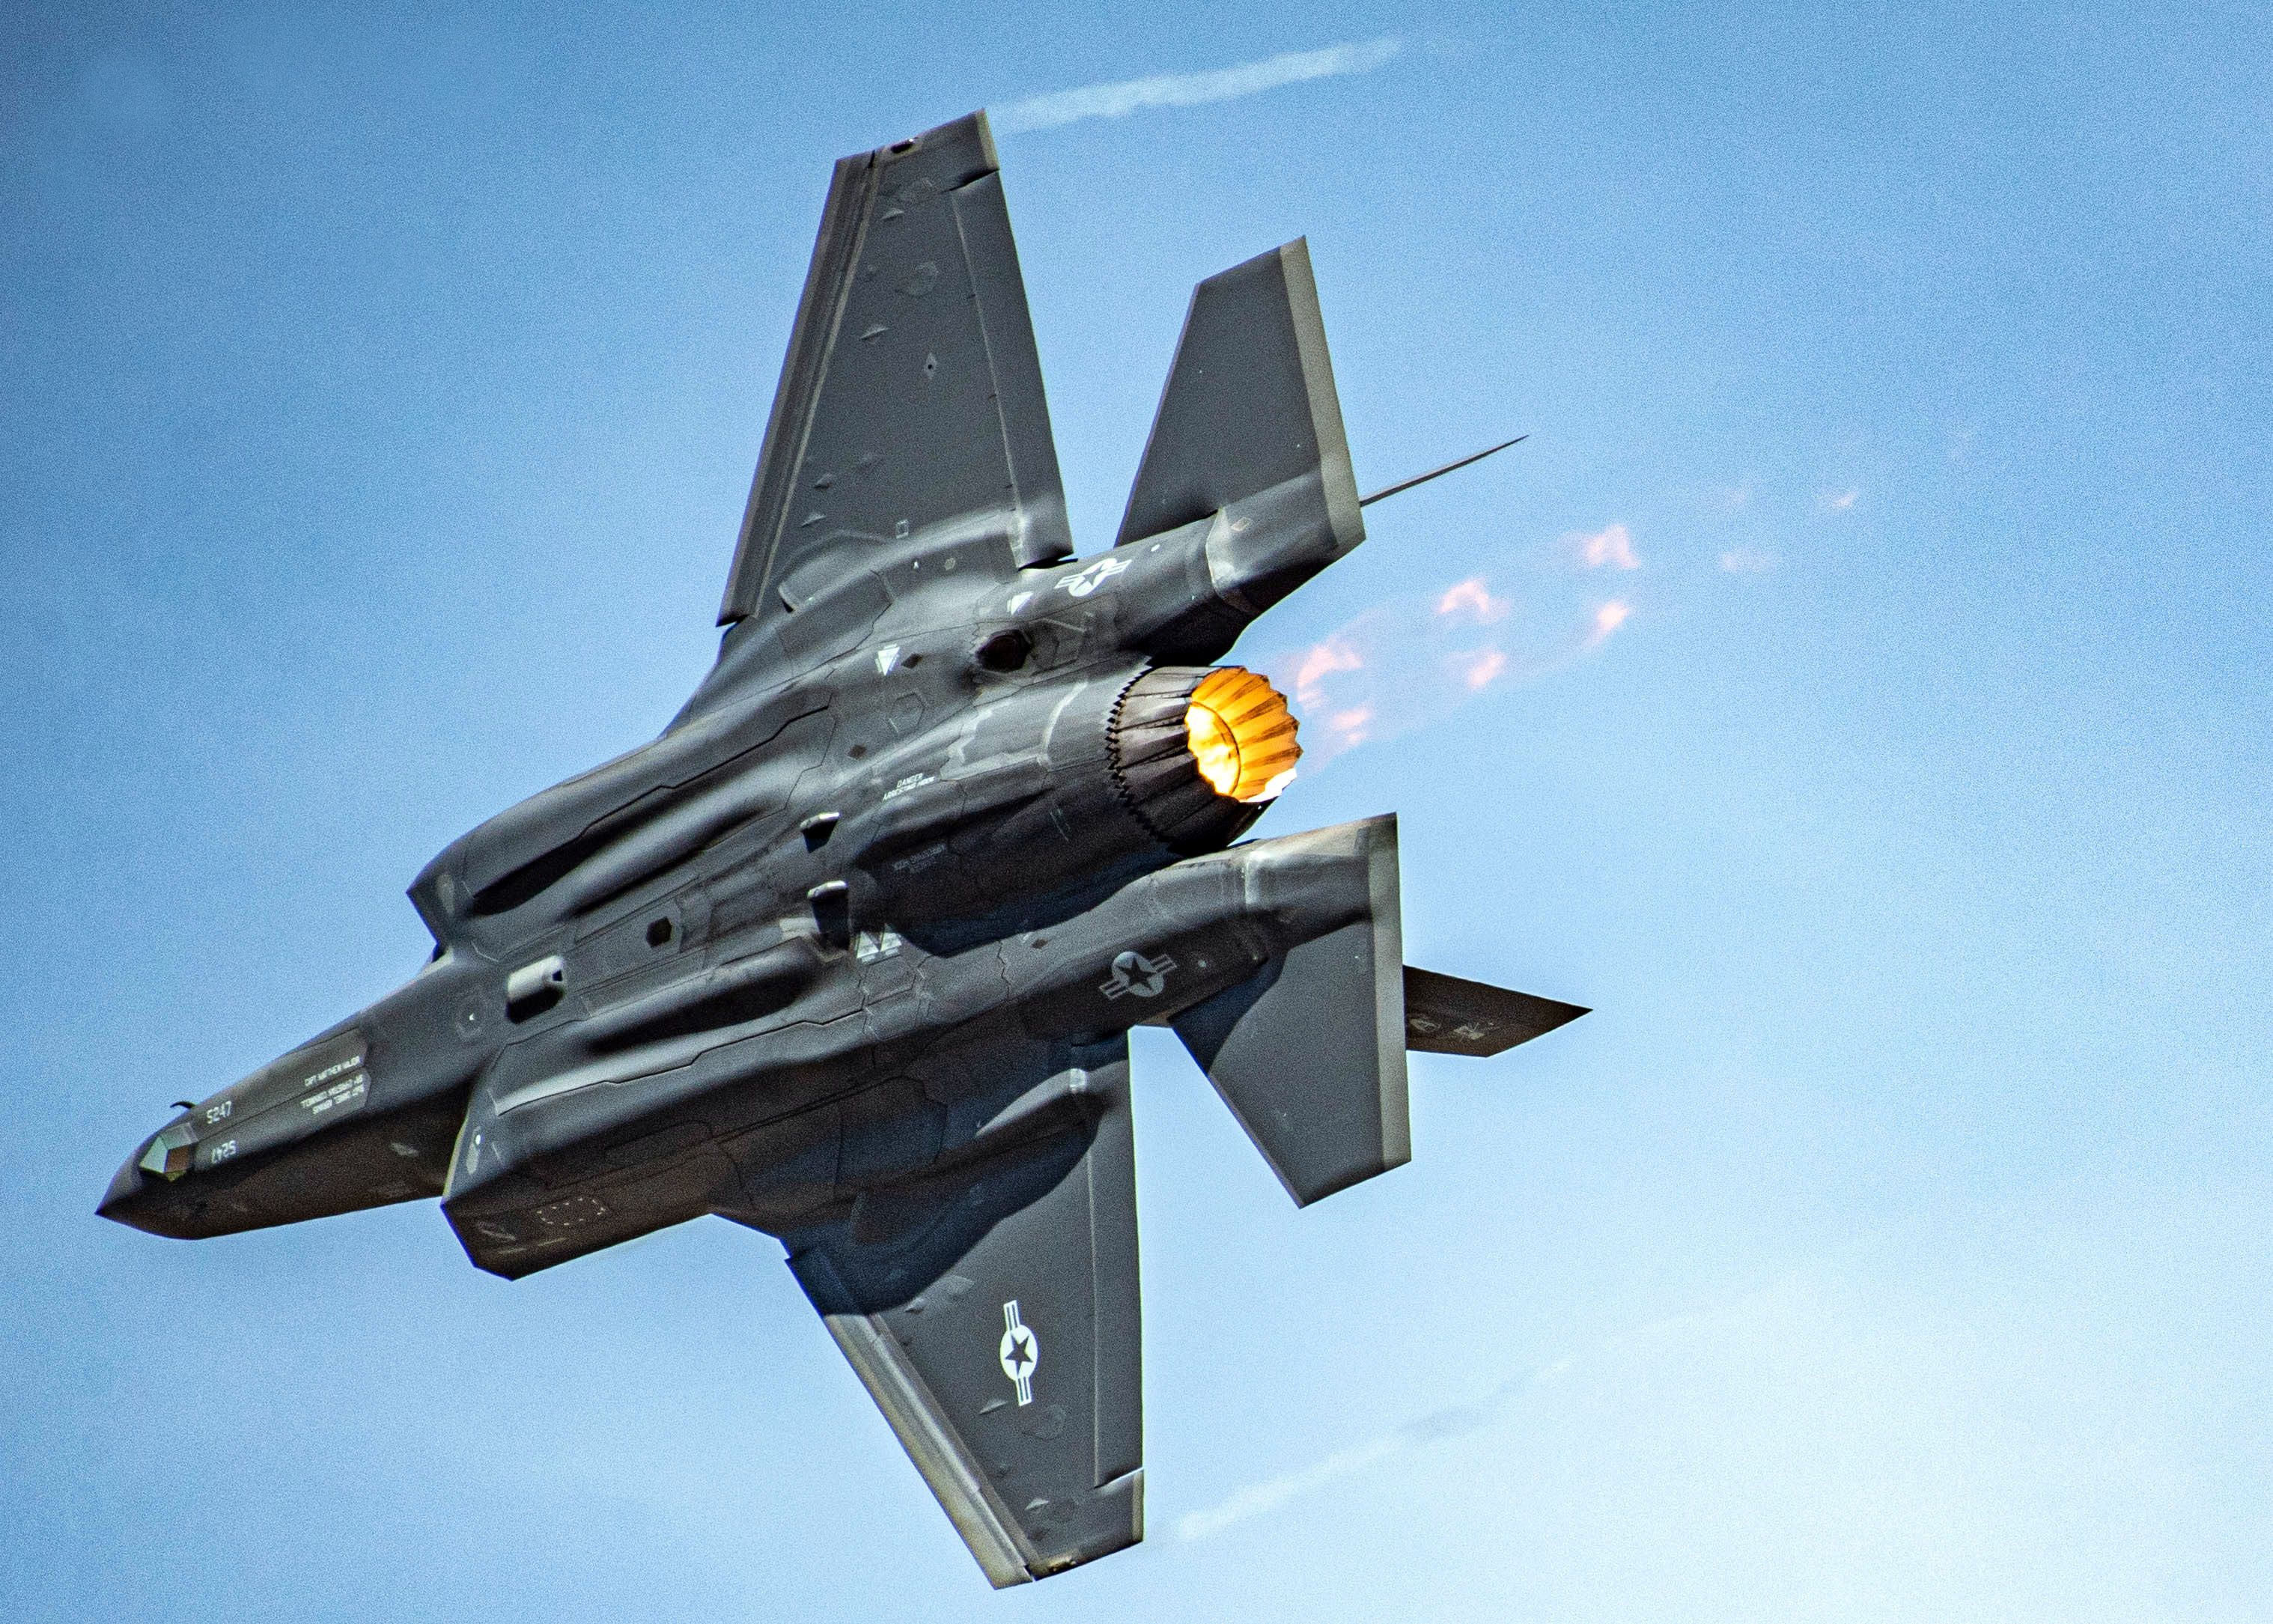 A USAF F-35A flying in the sky.